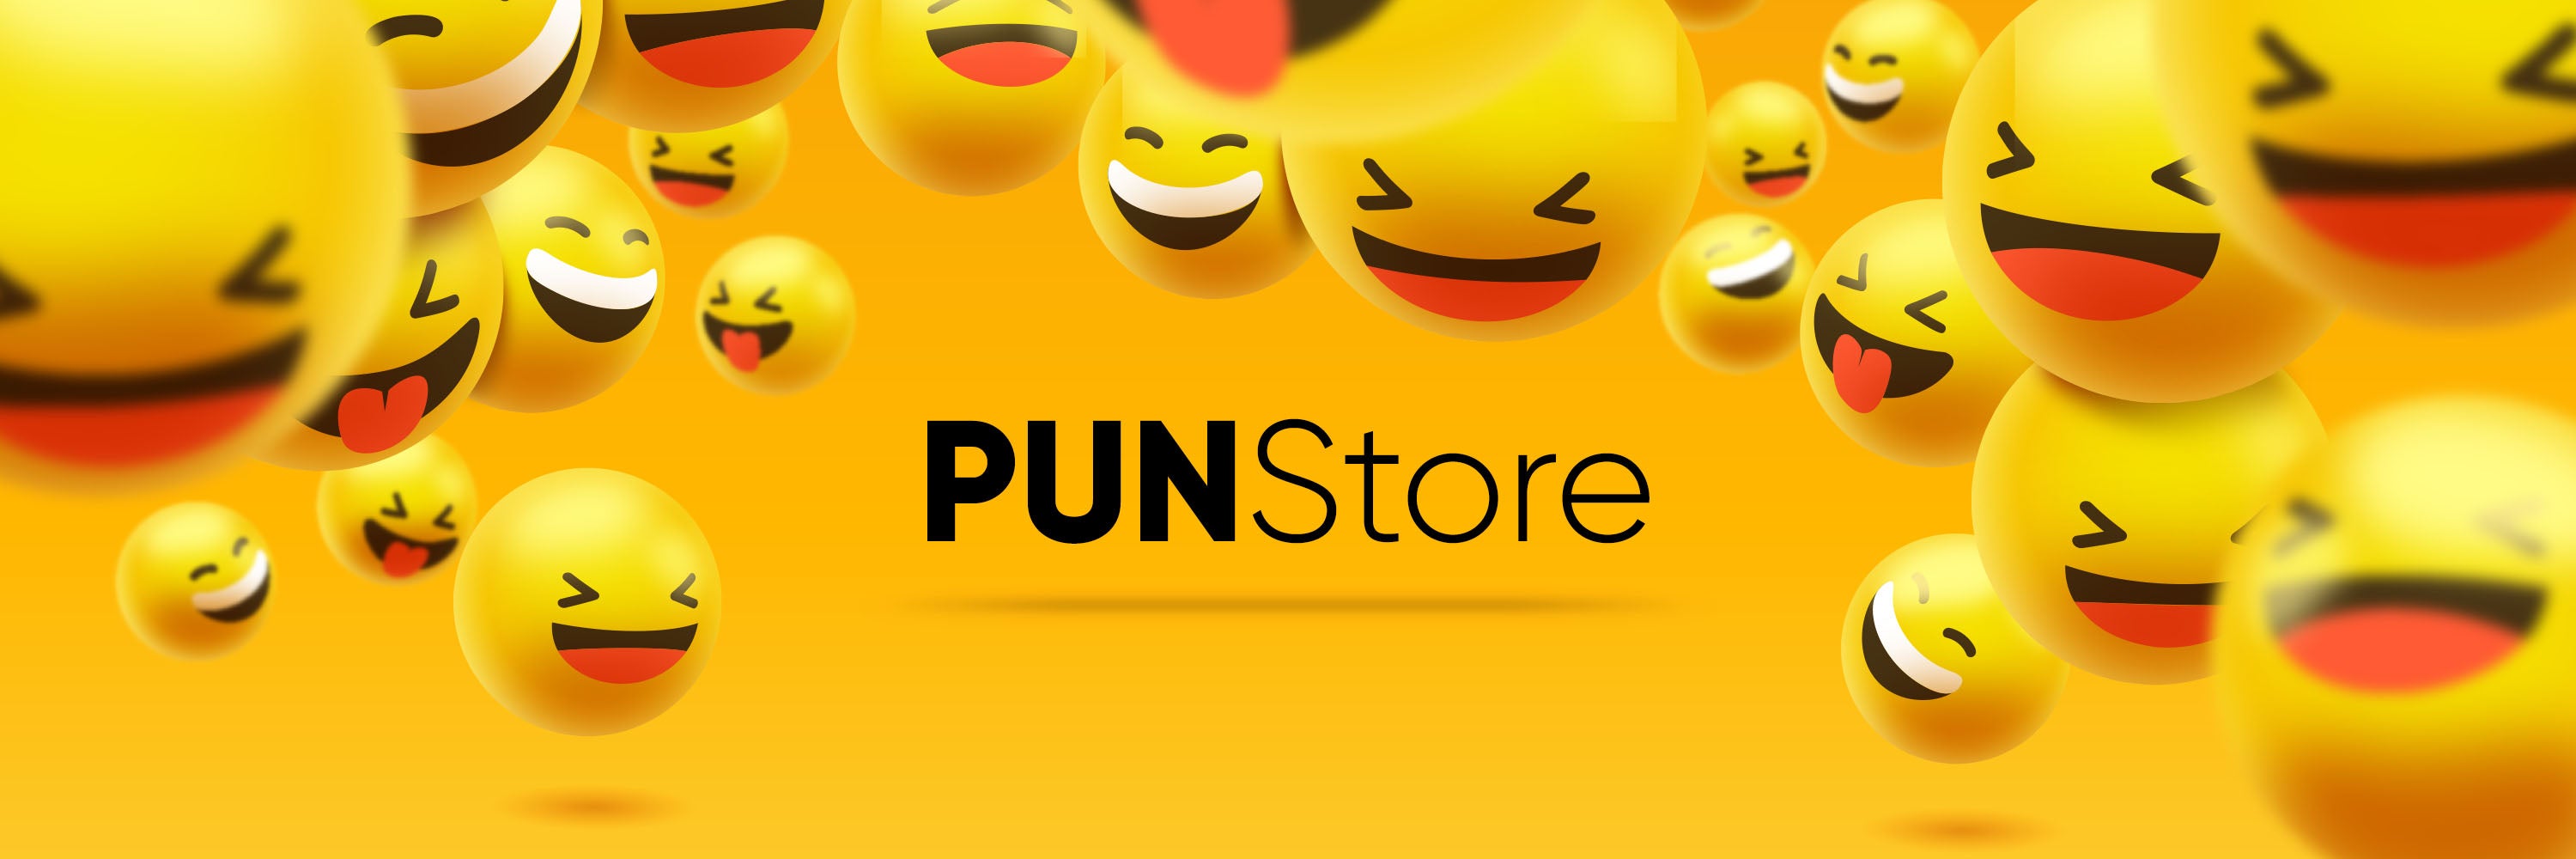 The Pun Store